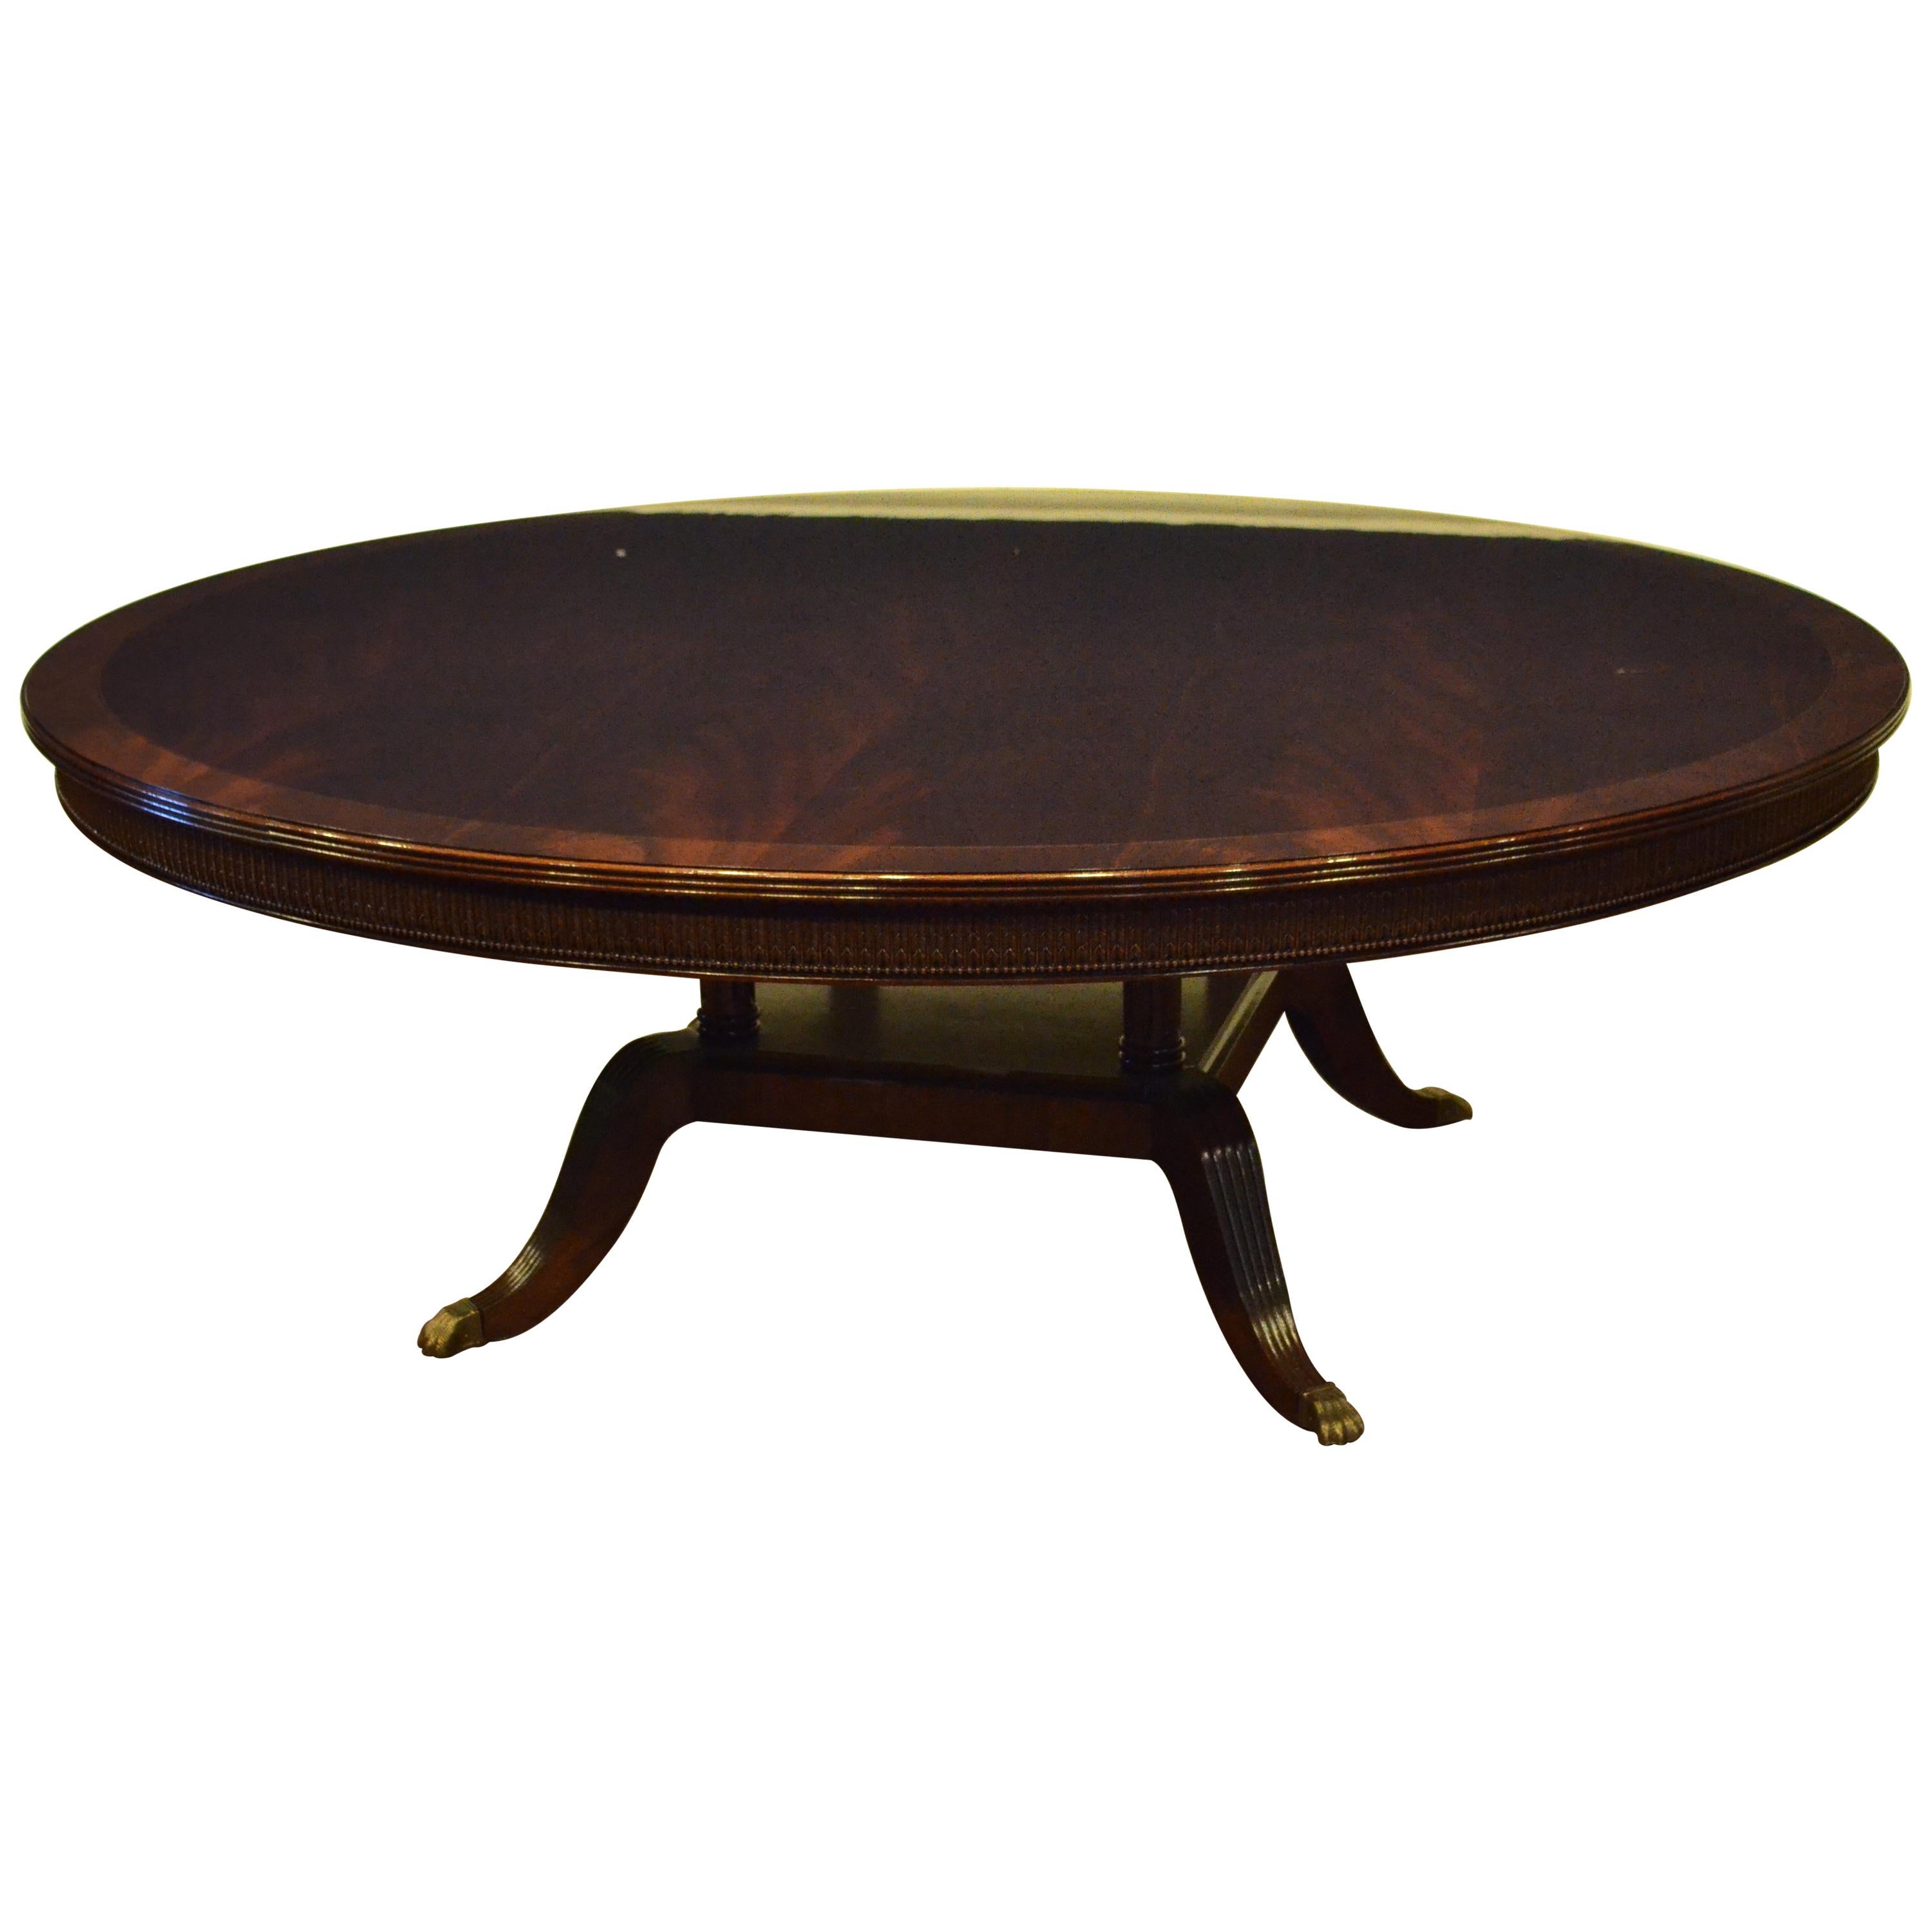 Large Round Crotch Mahogany Regency Style Dining Table by Leighton Hall For Sale